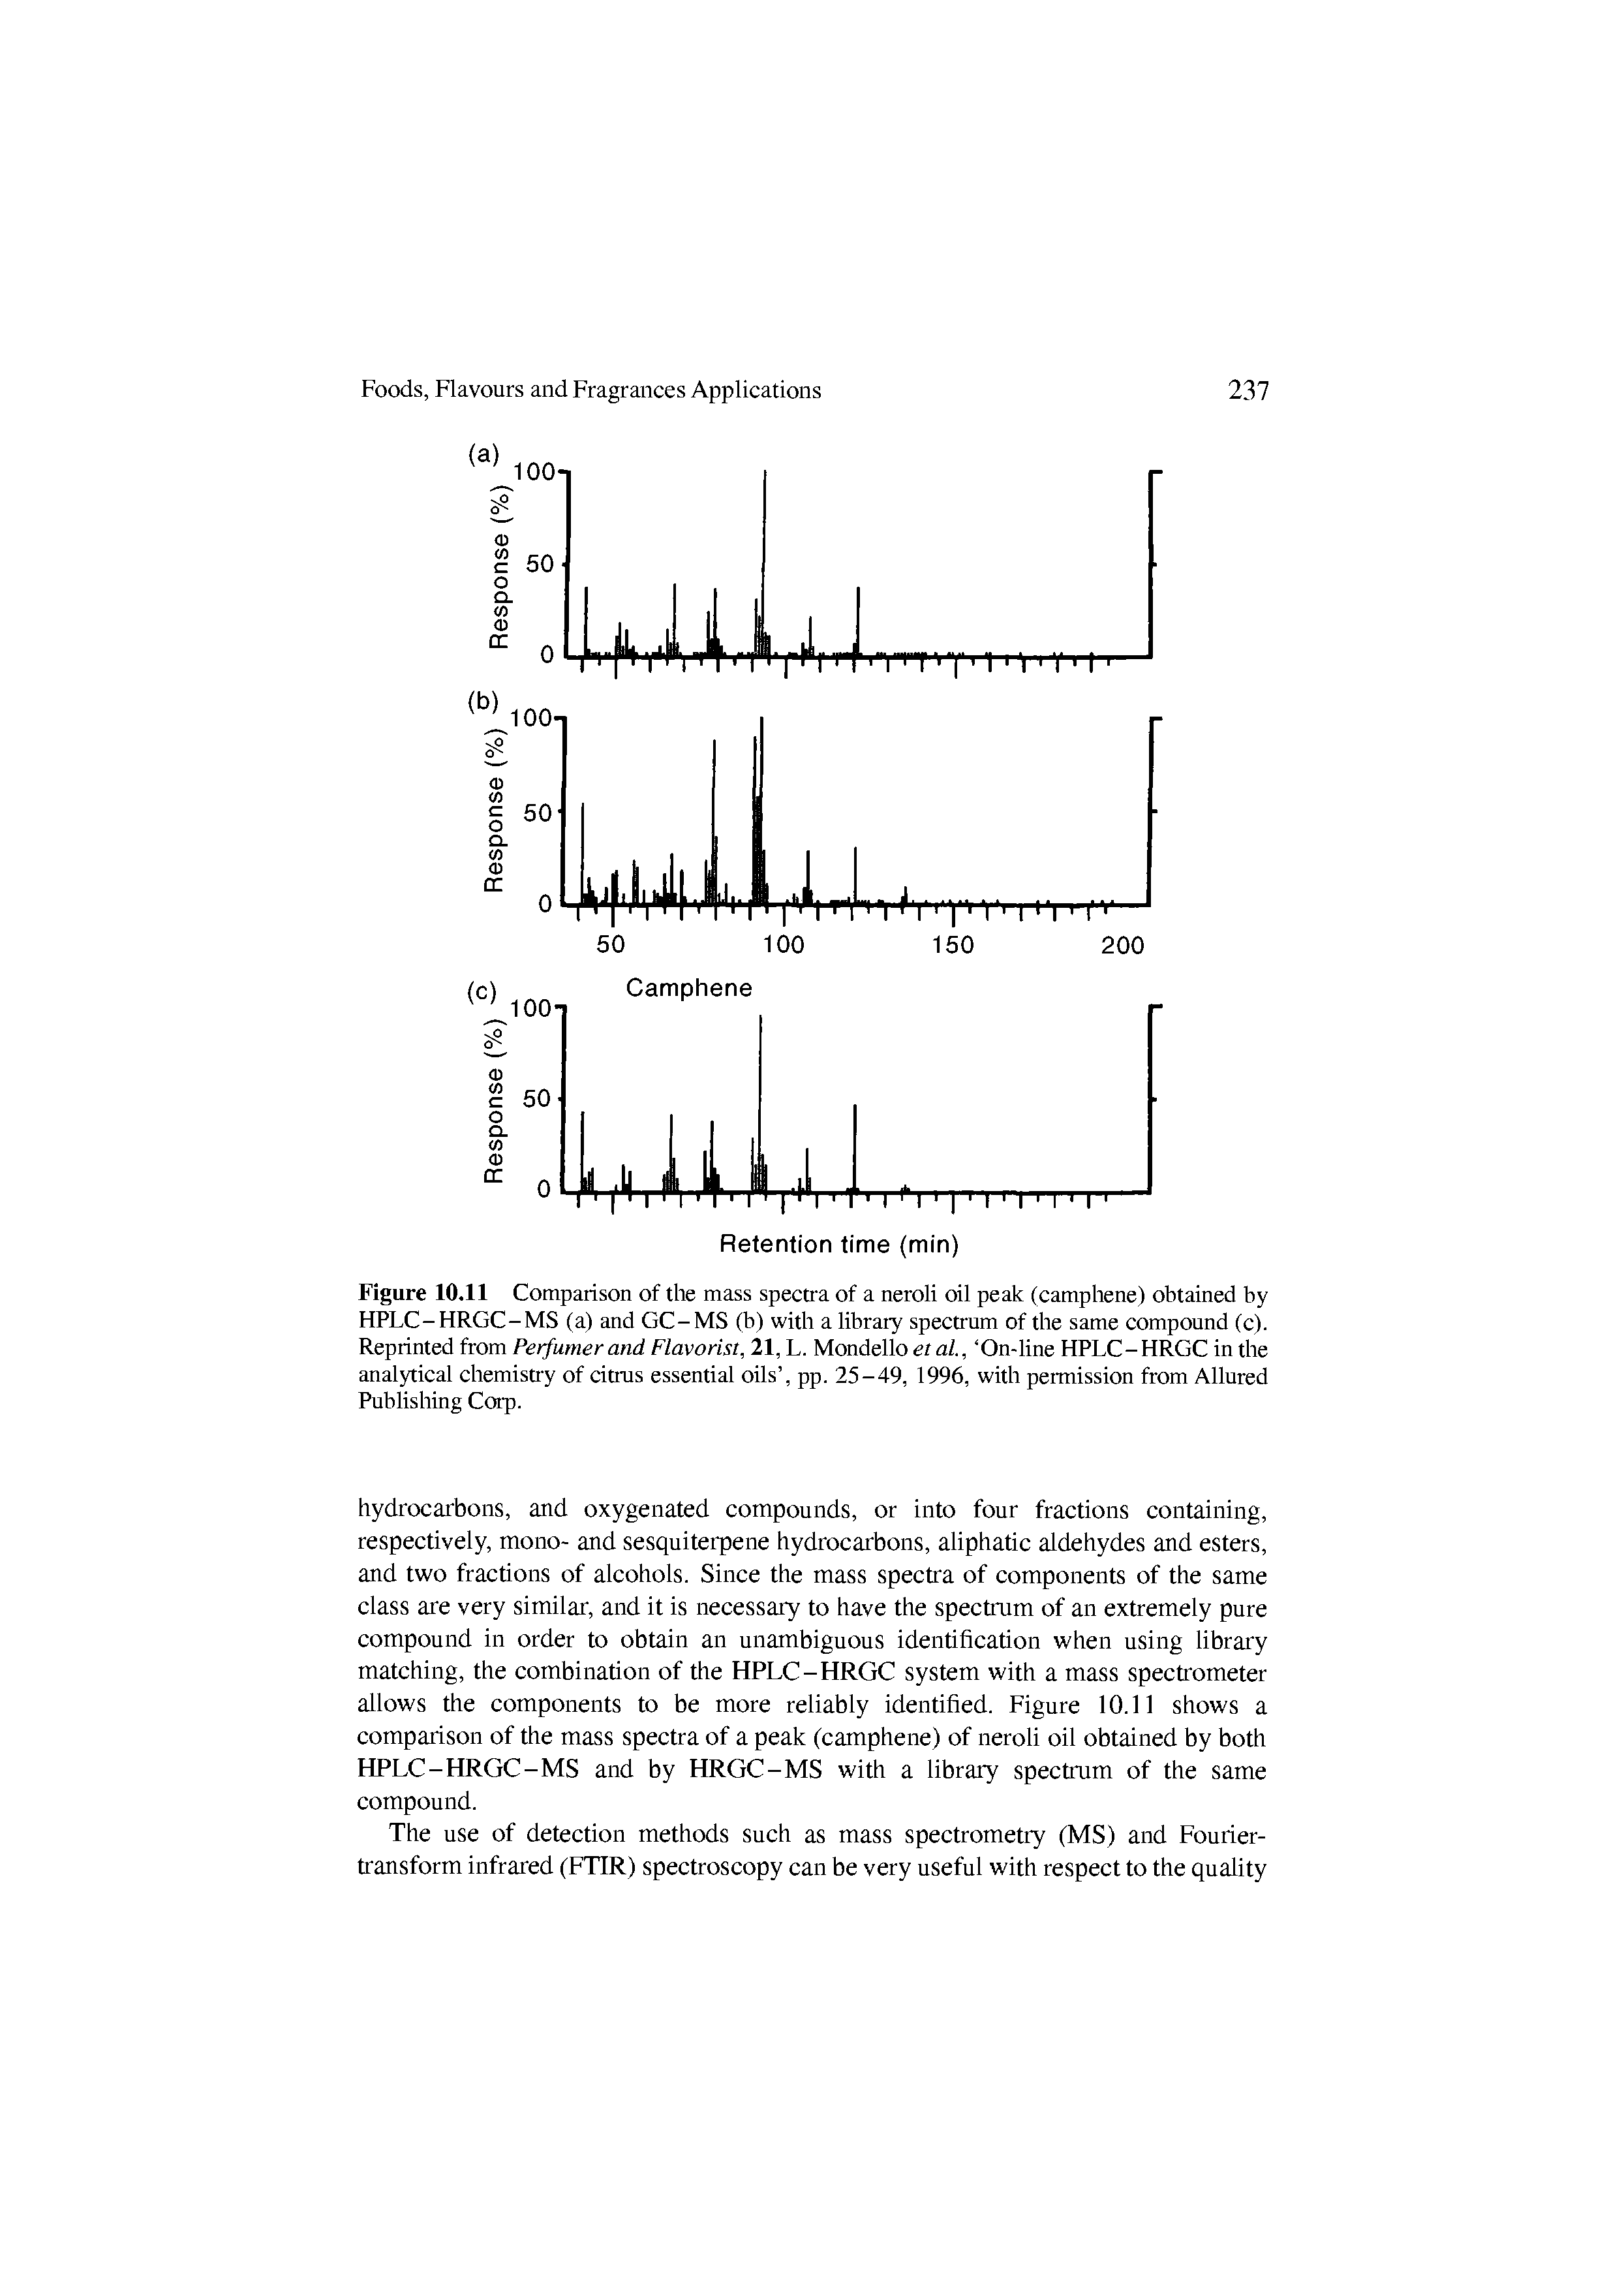 Figure 10.11 Comparison of the mass spectra of a neroli oil peak (camphene) obtained by HPLC-HRGC-MS (a) and GC-MS (b) with a library specti um of the same compound (c). Reprinted from Perfumer and Flavorist, 21, L. Mondello et al., On-line HPLC- HRGC in the analytical chemistiy of citms essential oils , pp. 25-49, 1996, with permission from Allured Publishing Coip.